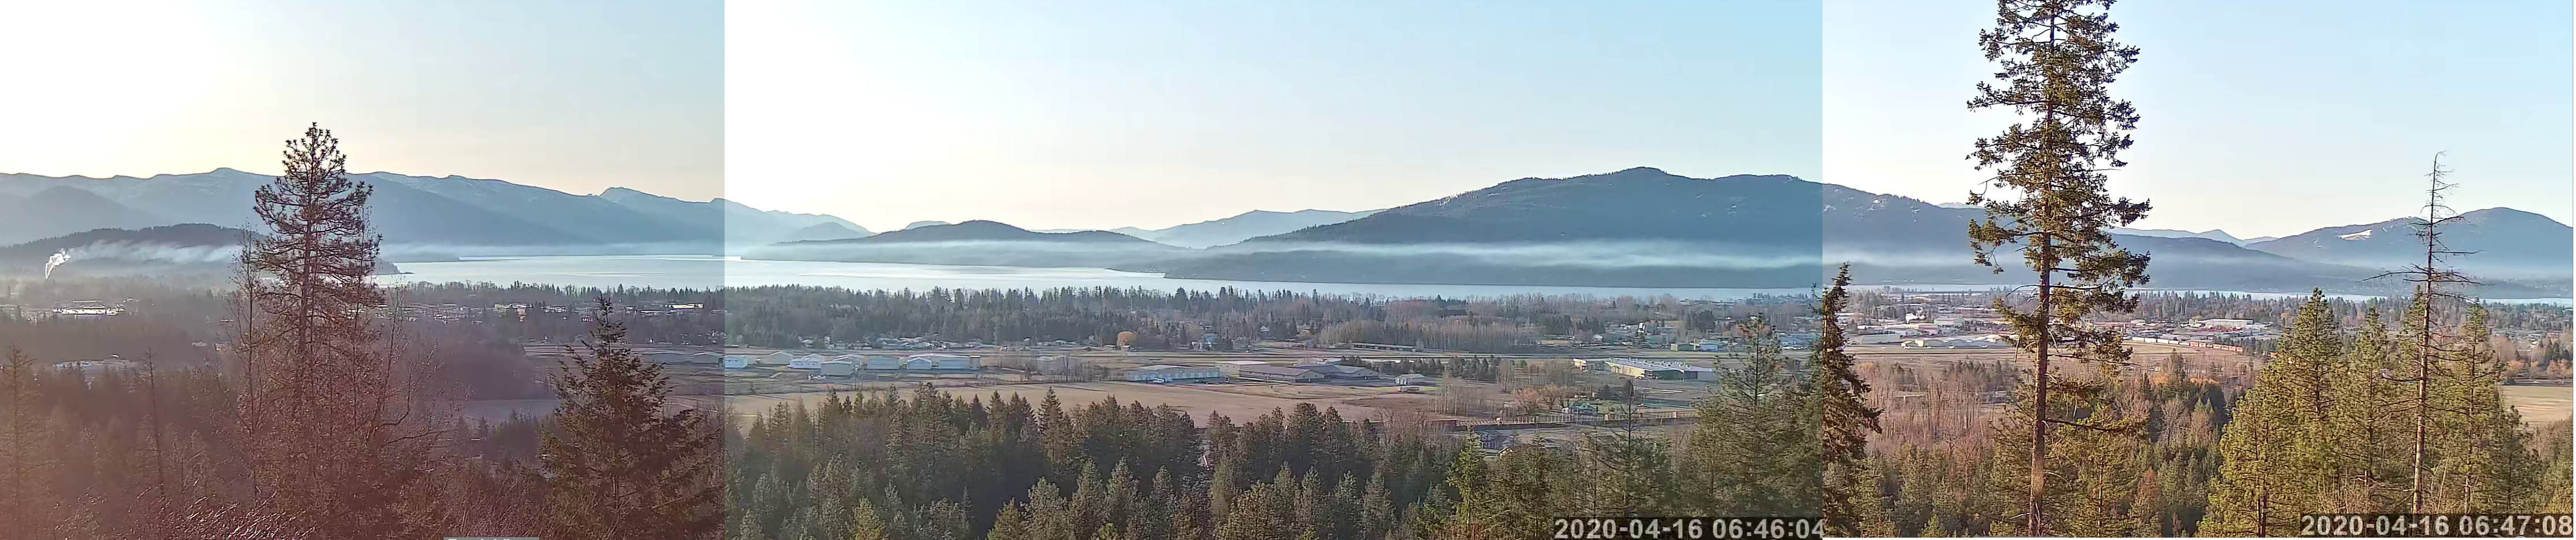 Panoramic of Pollution Coming From Lignetics in Kootenai and Hanging Over Lake Pend Oreille and Sandpoint Idaho